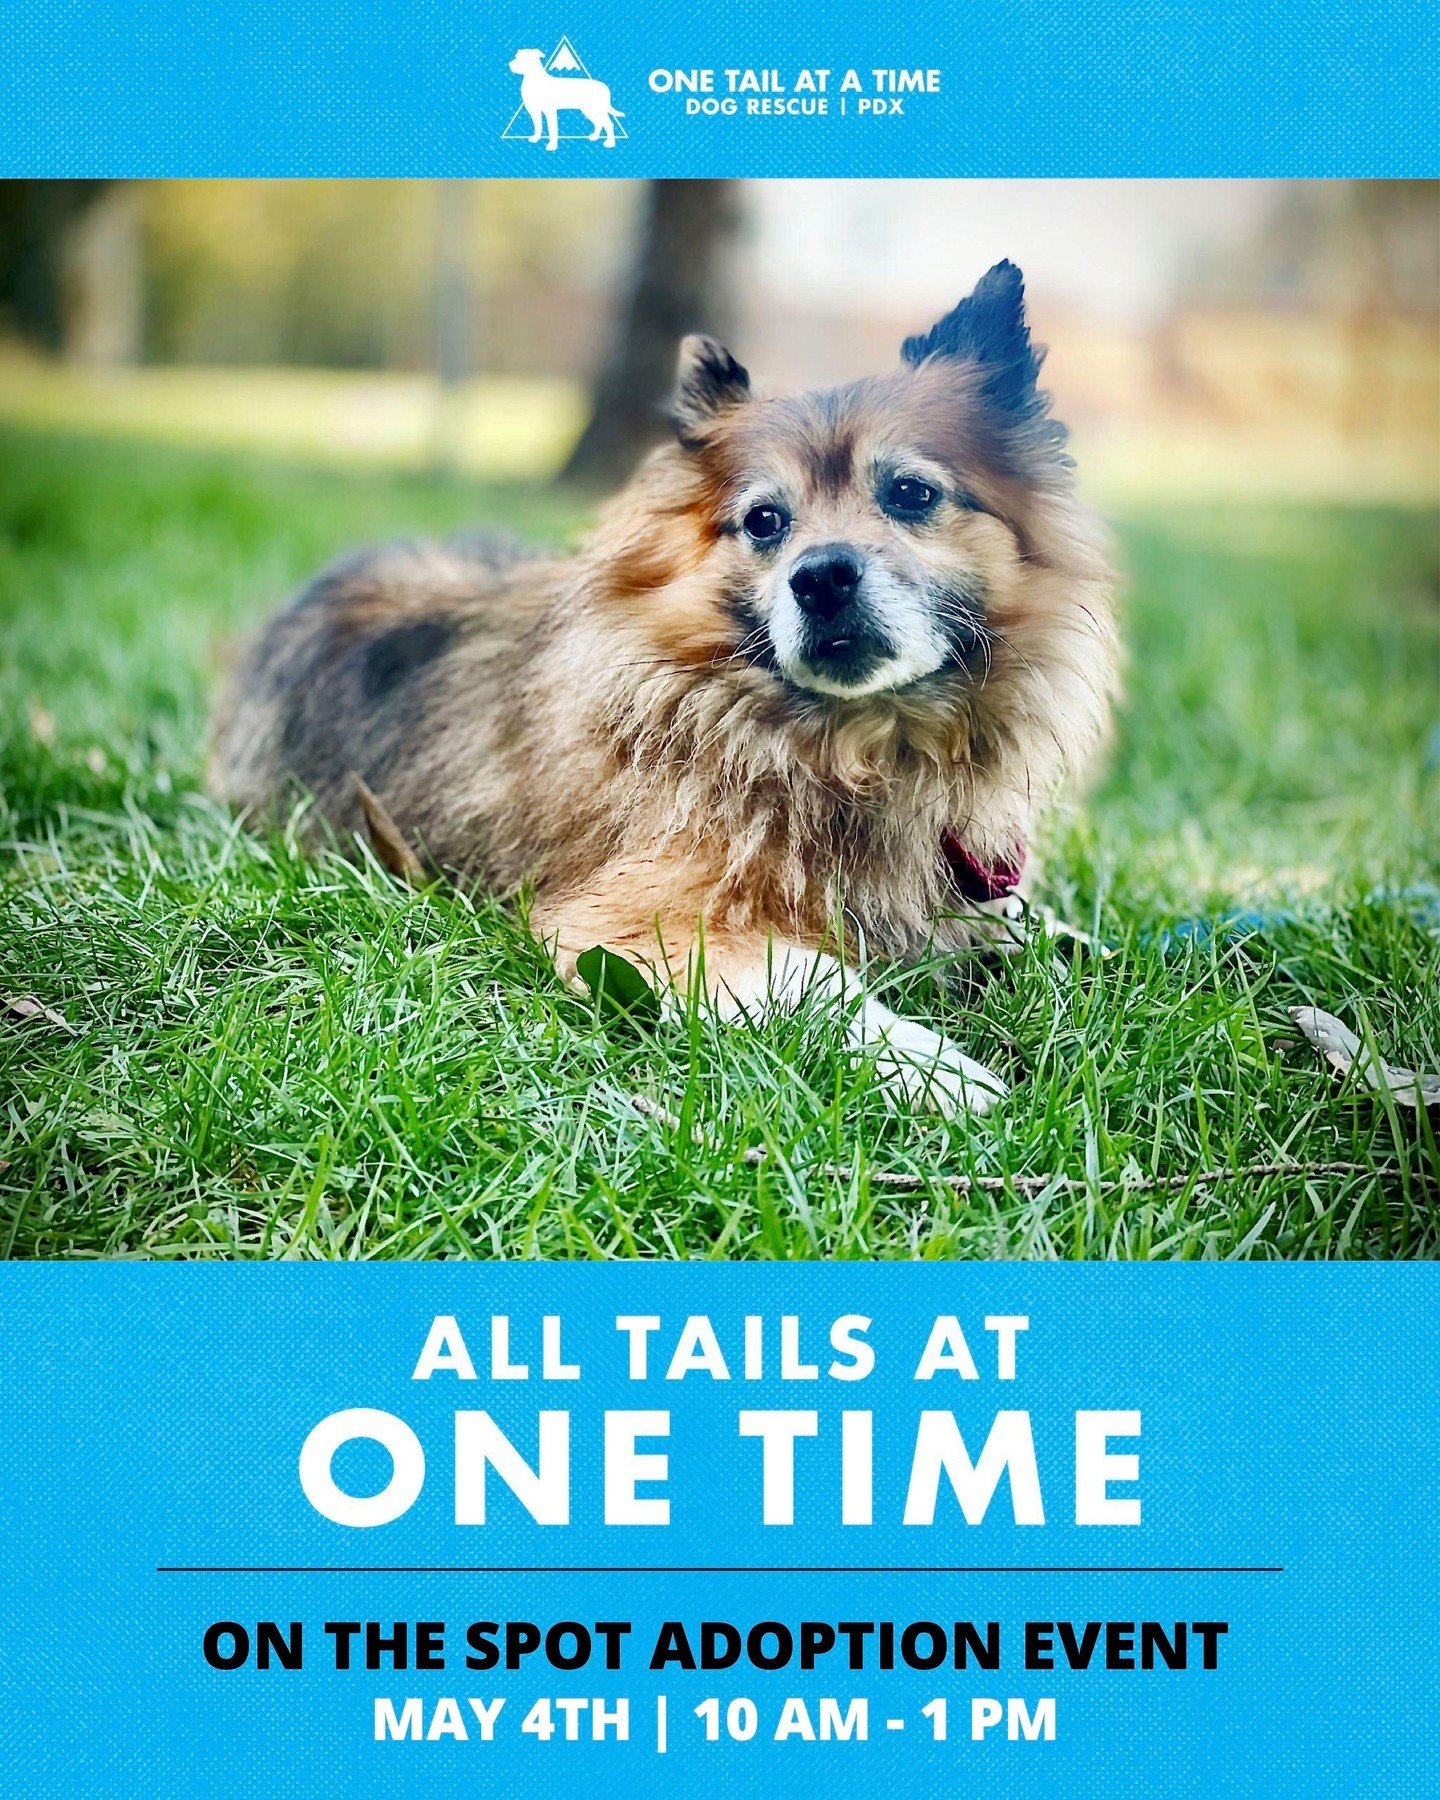 Three cheers for All Tails! Our on the spot adoption events are a hit, and our next one is right around the corner on May 4th from 10am - 1pm. ⁠
⁠
All Tails is your chance to meet our adoptable dogs irl and see if there's a spark. Bring the whole fam